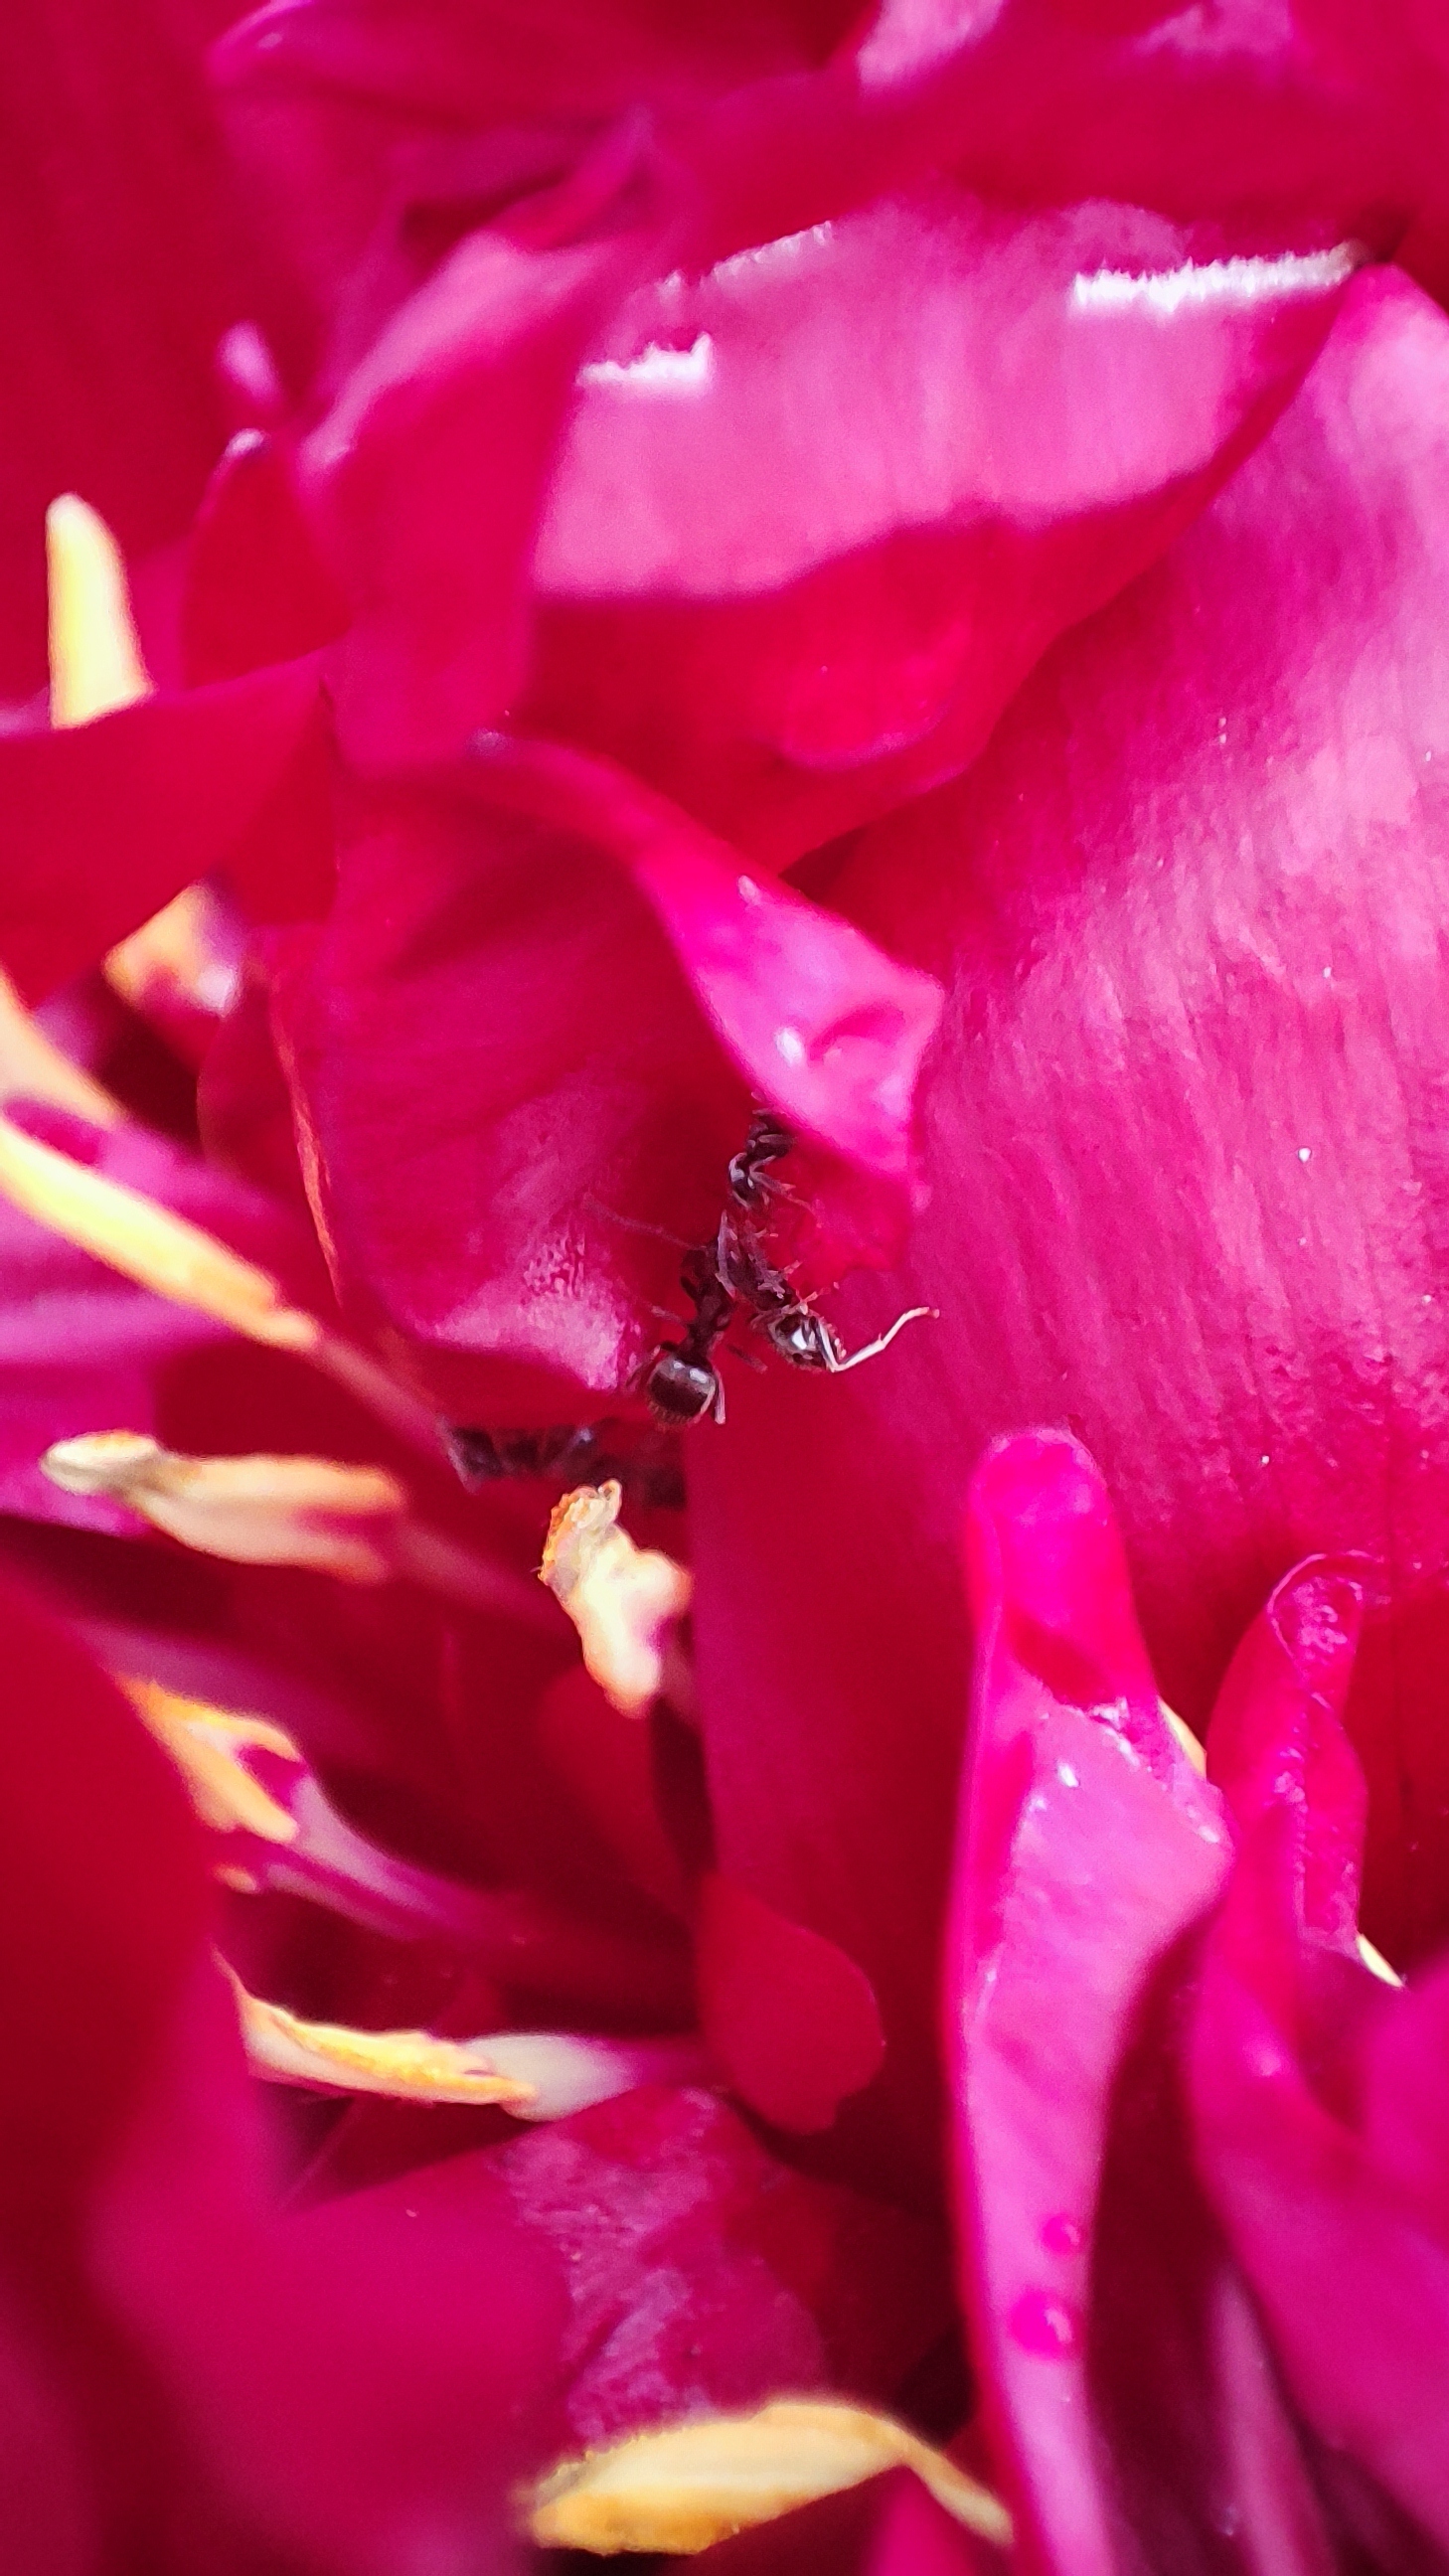 Macro photography with phone 2 (and more) - My, Macro photography, The photo, Mobile photography, Longpost